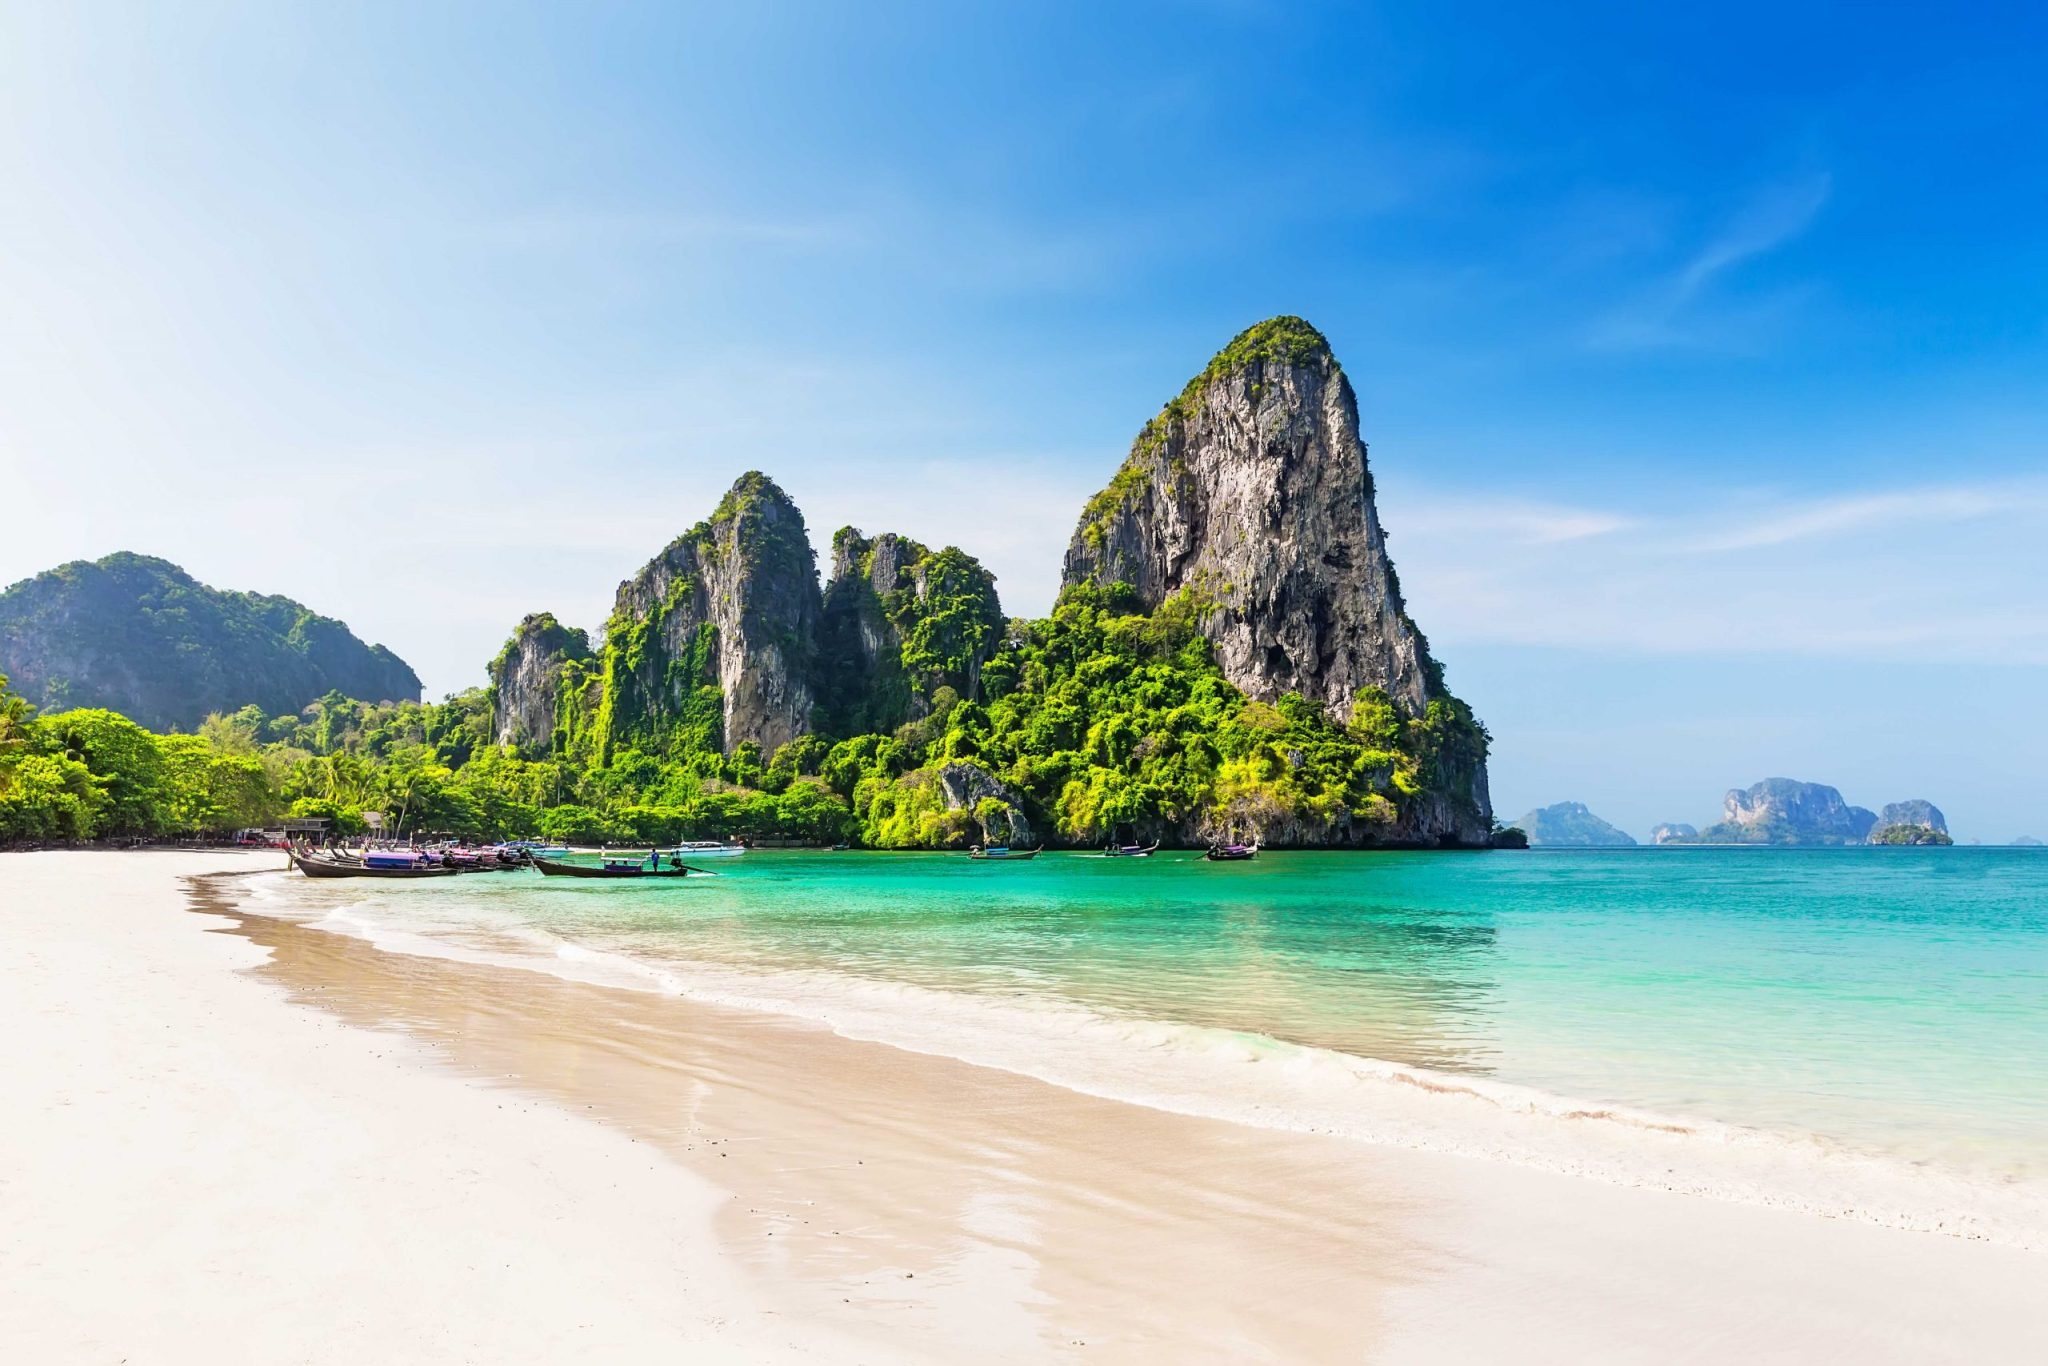 With some of the most beautiful beaches in the world, Phuket is a great place to spend your New Year holiday.